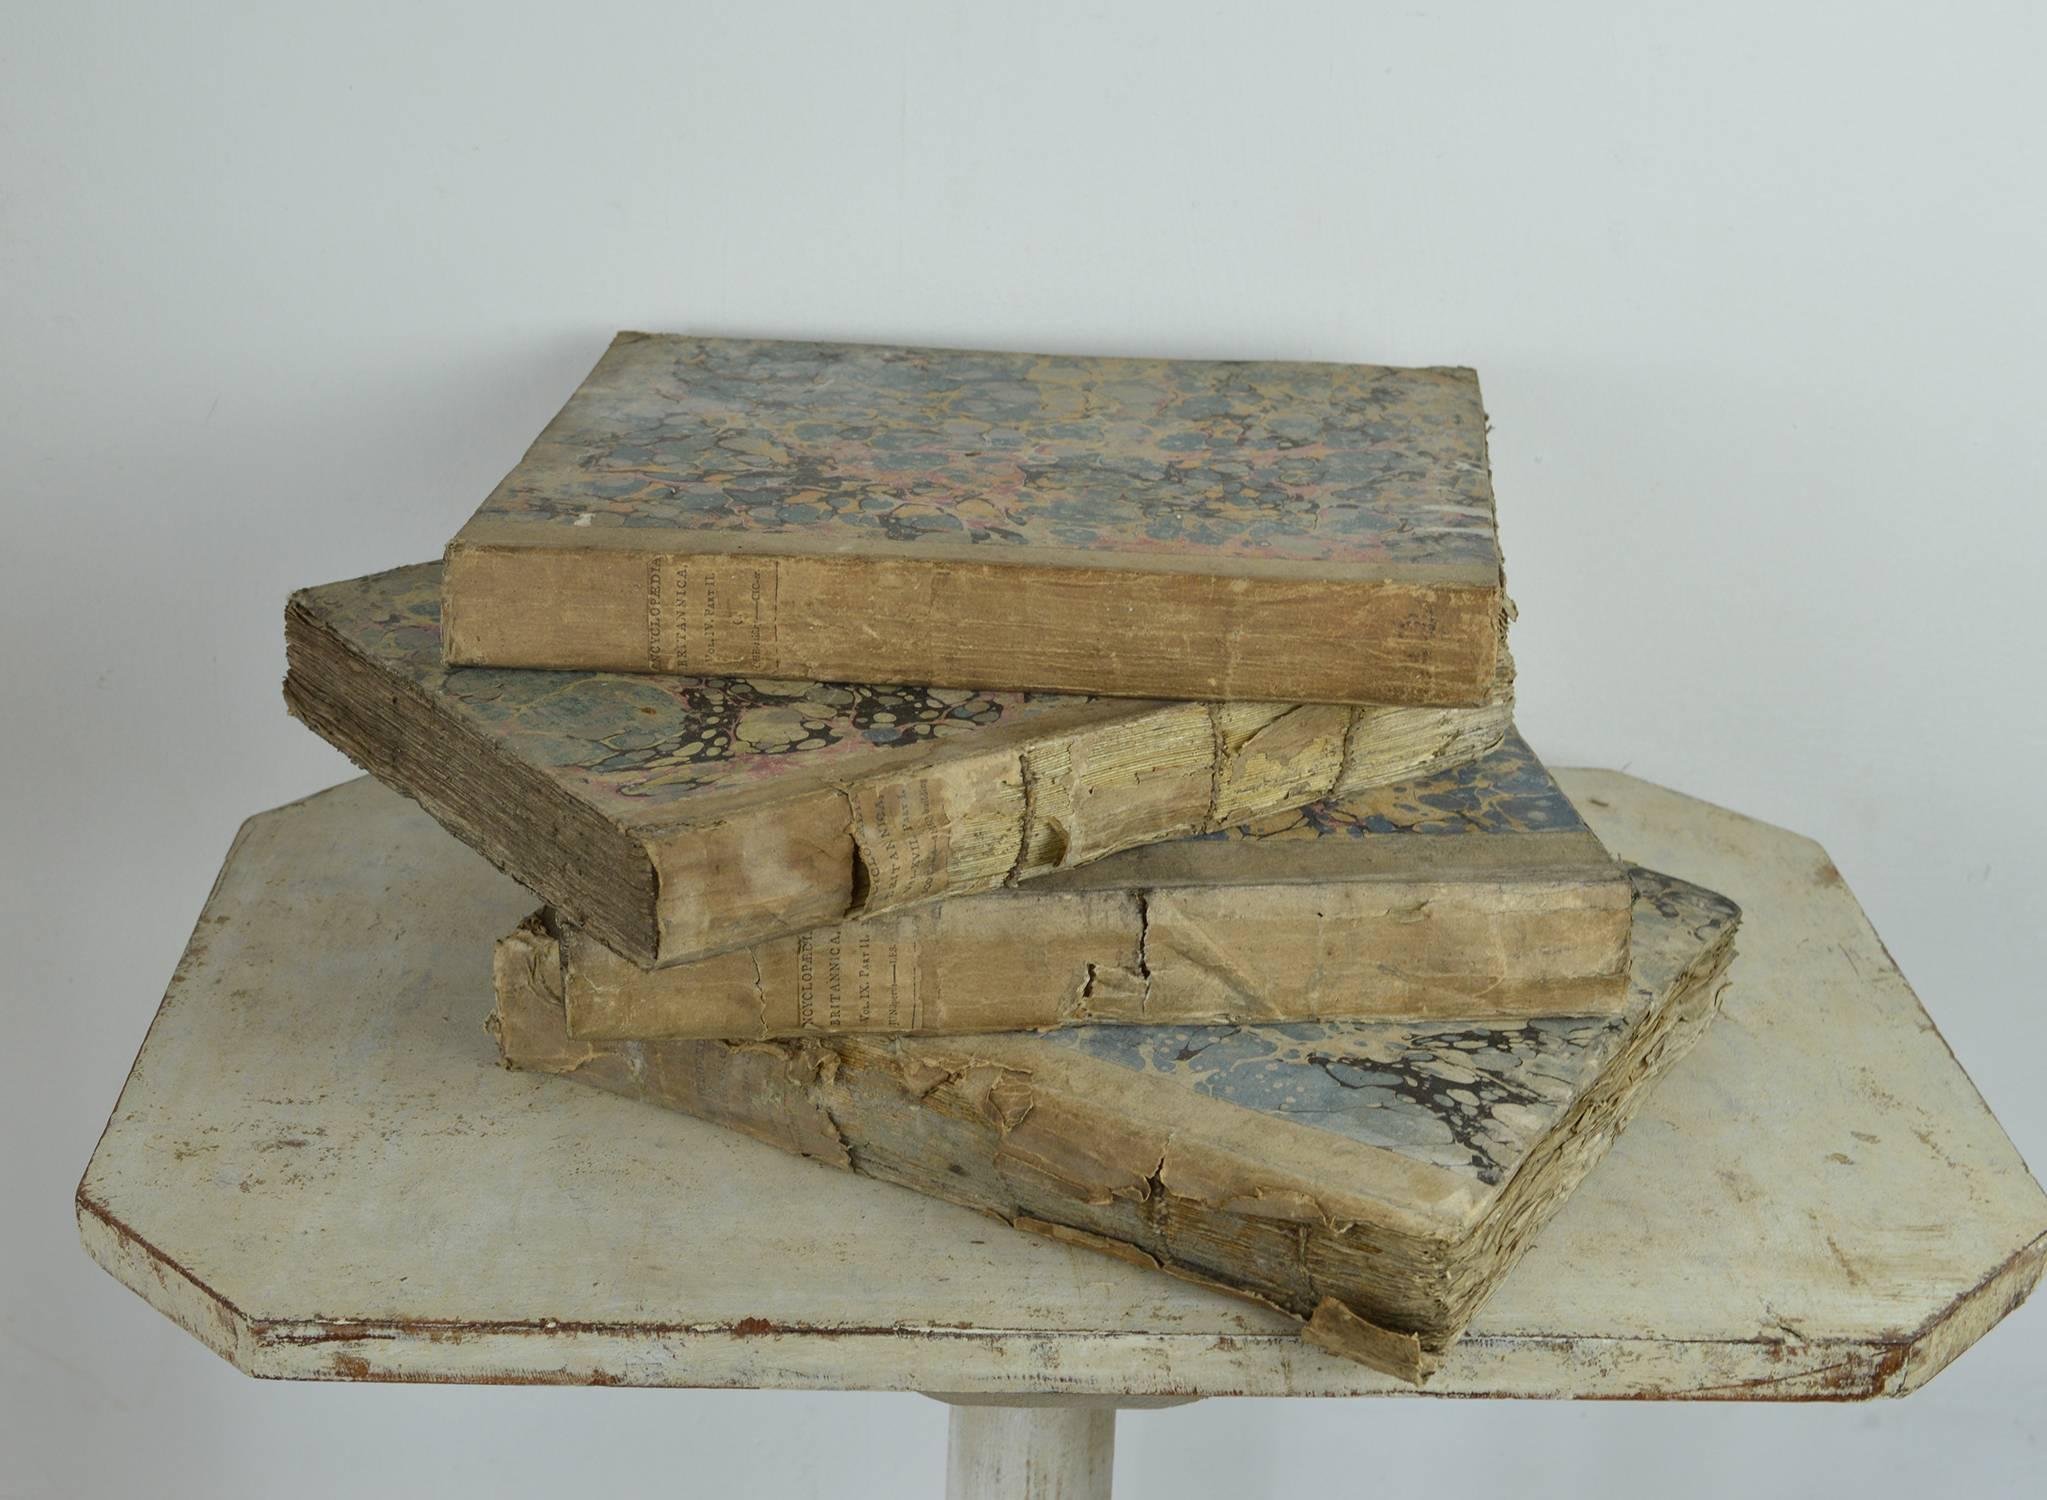 Paper Sets of Antique 18th Century Books with Marbleized Bindings